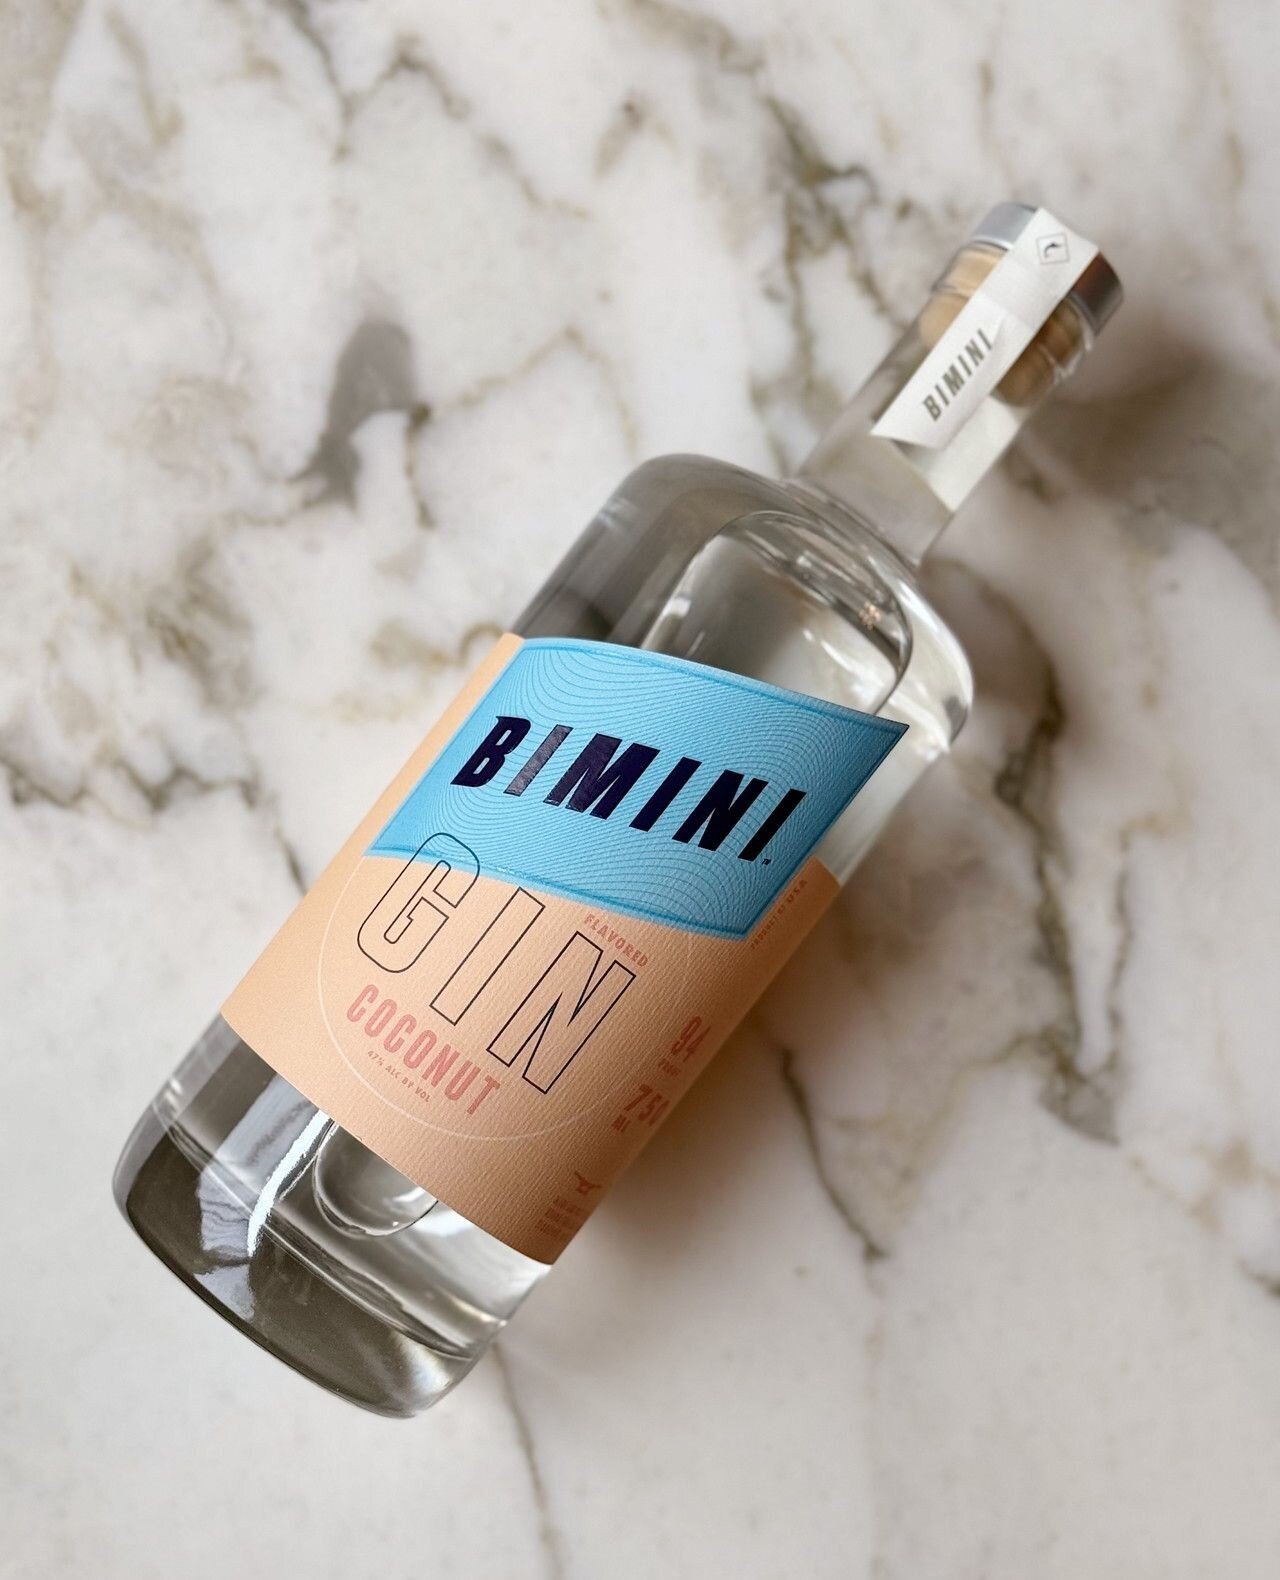 @biminigin is a modern gin out of Maine, brewed with grapefruit zest, hops, and coriander seed. The resulting gin is bright, citrusy, and floral, without any of the pine tree-like bite of juniper that is classic in many traditional gins. Their Coconu